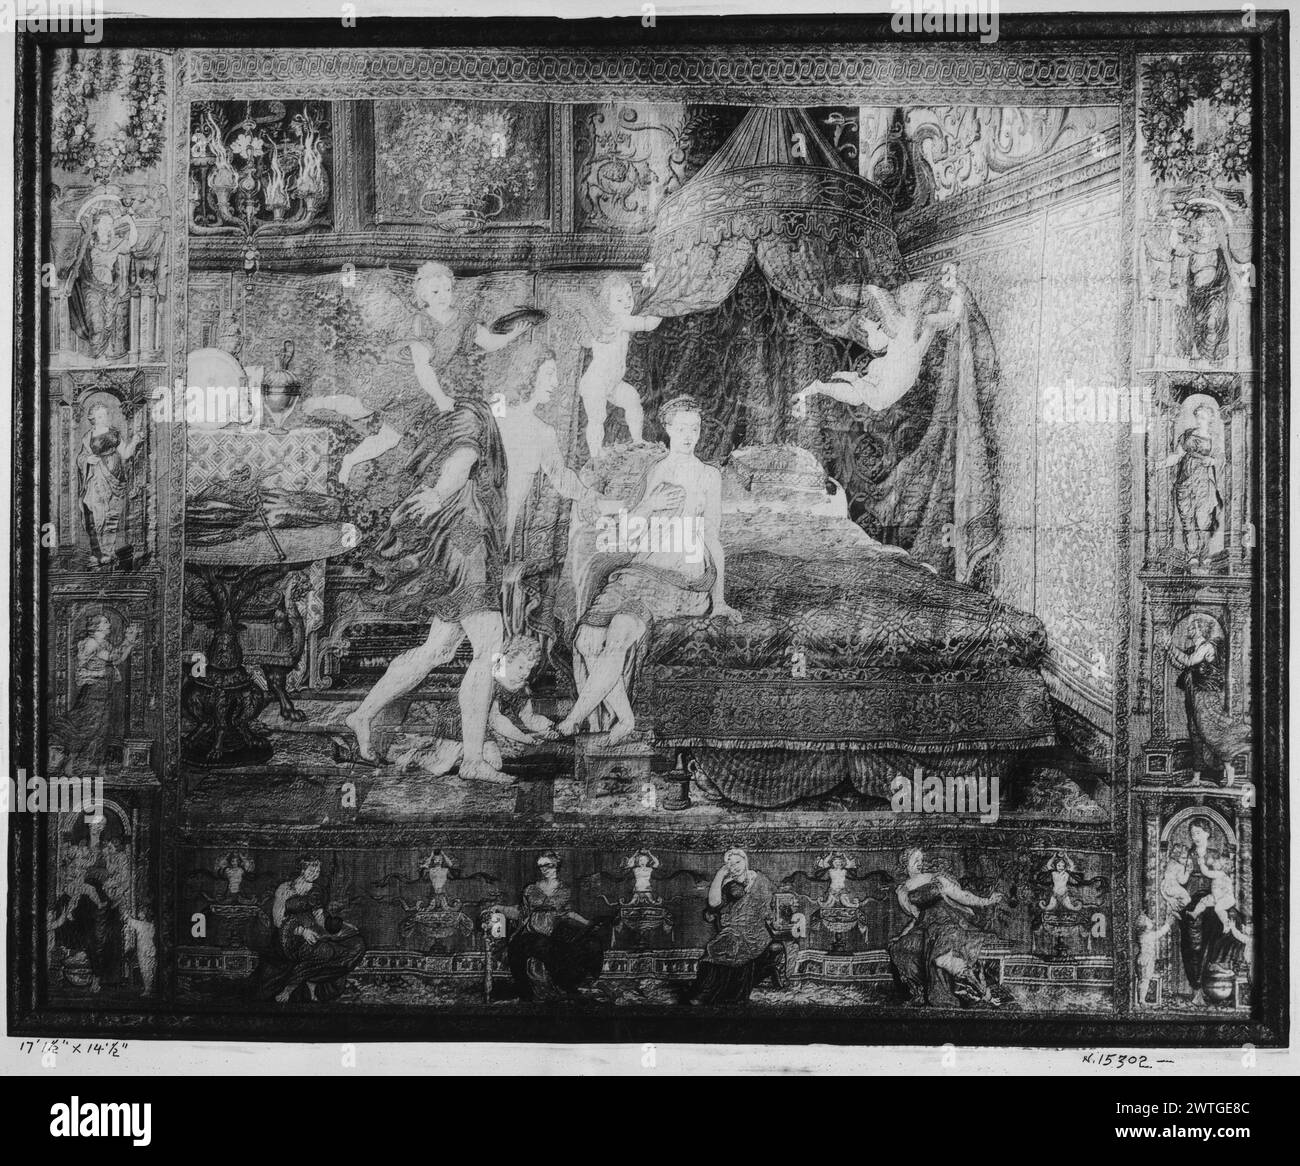 Bridal Chamber of Herse. Pannemaker, Wilhelm de (Netherlandish (before 1600) - Flanders, act. 1535-1578) (workshop) [weaver] c. 1550 Tapestry Dimensions: H 14'.5' x W 17'1.5' Tapestry Materials/Techniques: wool & silk; silk; metallic thread (silver); metallic thread (silver-gilt) Culture: Flemish Weaving Center: Brussels Ownership History: La Cerda family, dukes of Medinaceli, Spain (complete set in their possession, possibly since the sixteenth century). Duchess of Denia, widow of the duke (in her possession until her death in 1903, when the tapestry passed to the duke's heirs). French & Co. Stock Photo